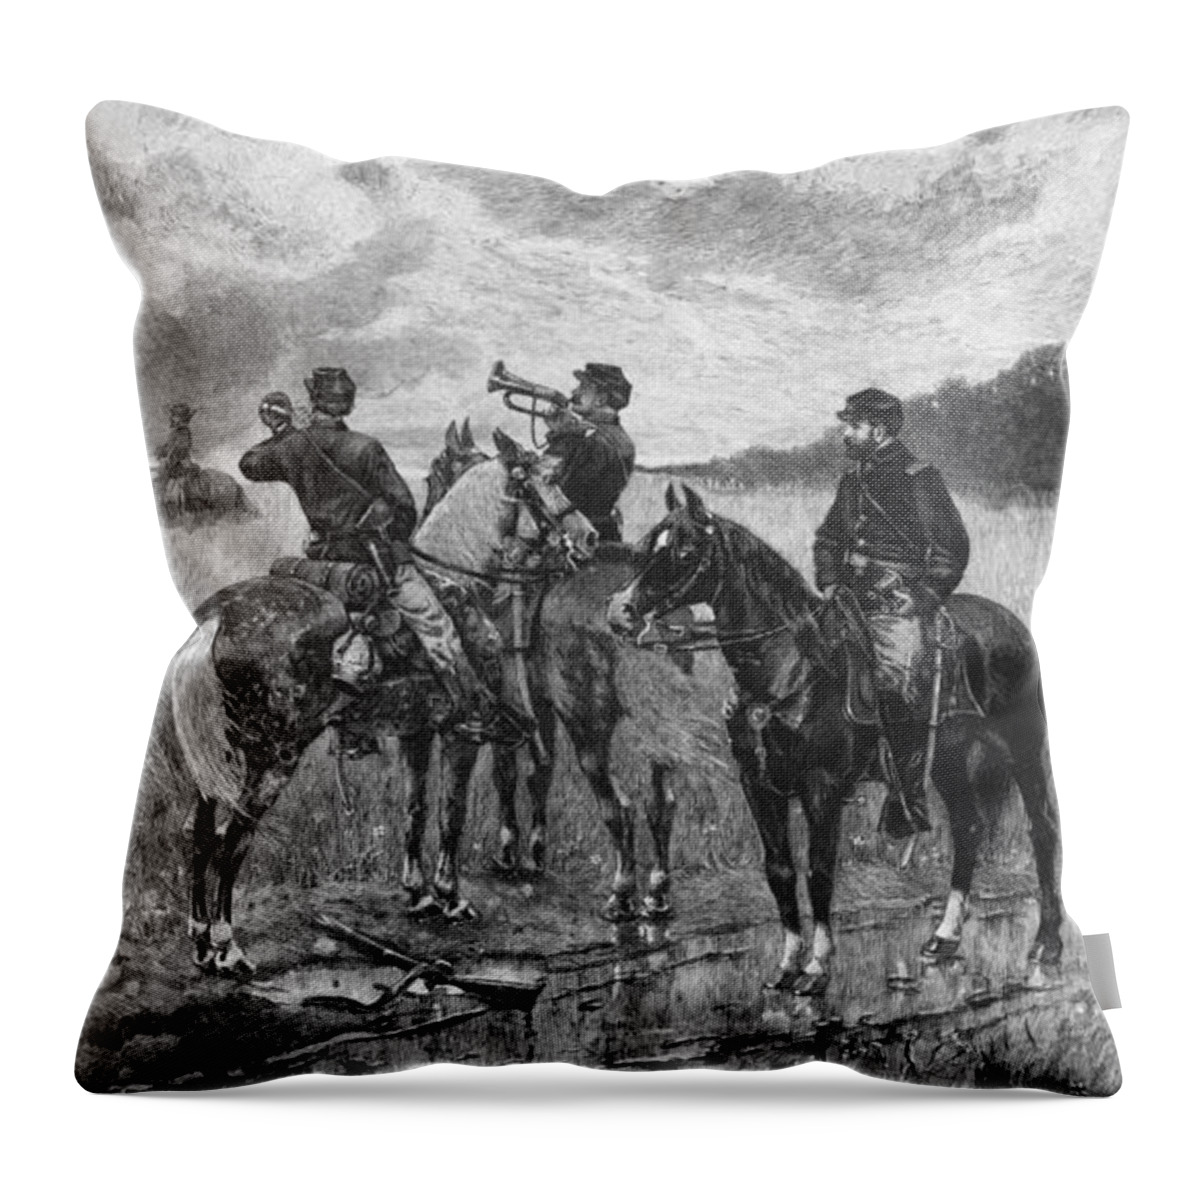 Civil War Throw Pillow featuring the mixed media Civil War Soldiers On Horseback by War Is Hell Store